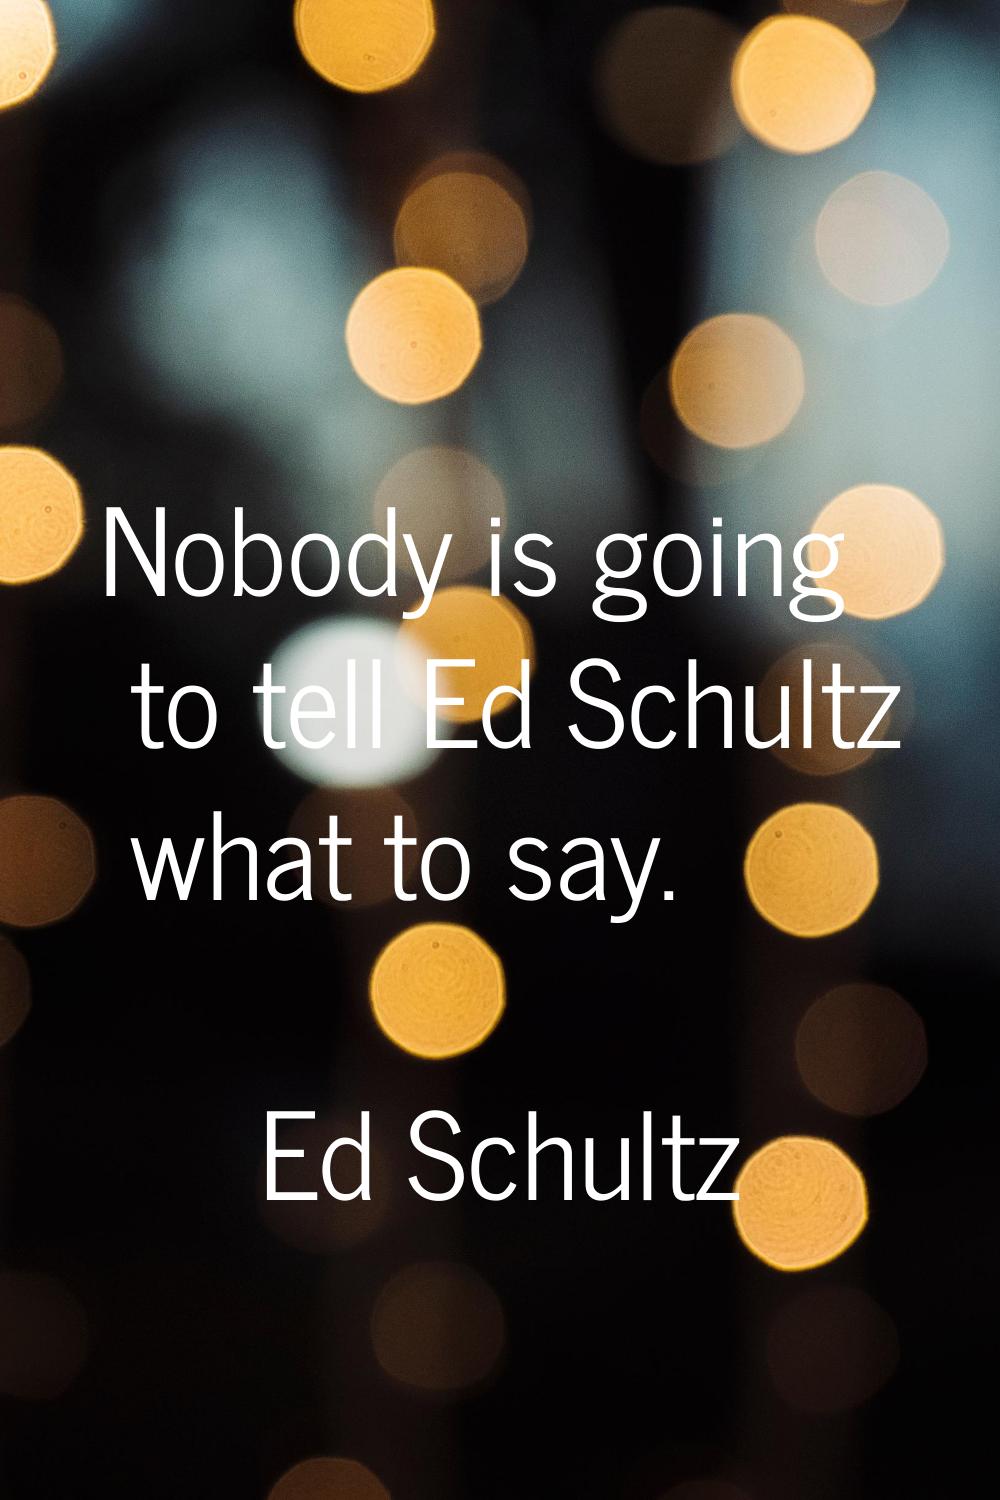 Nobody is going to tell Ed Schultz what to say.